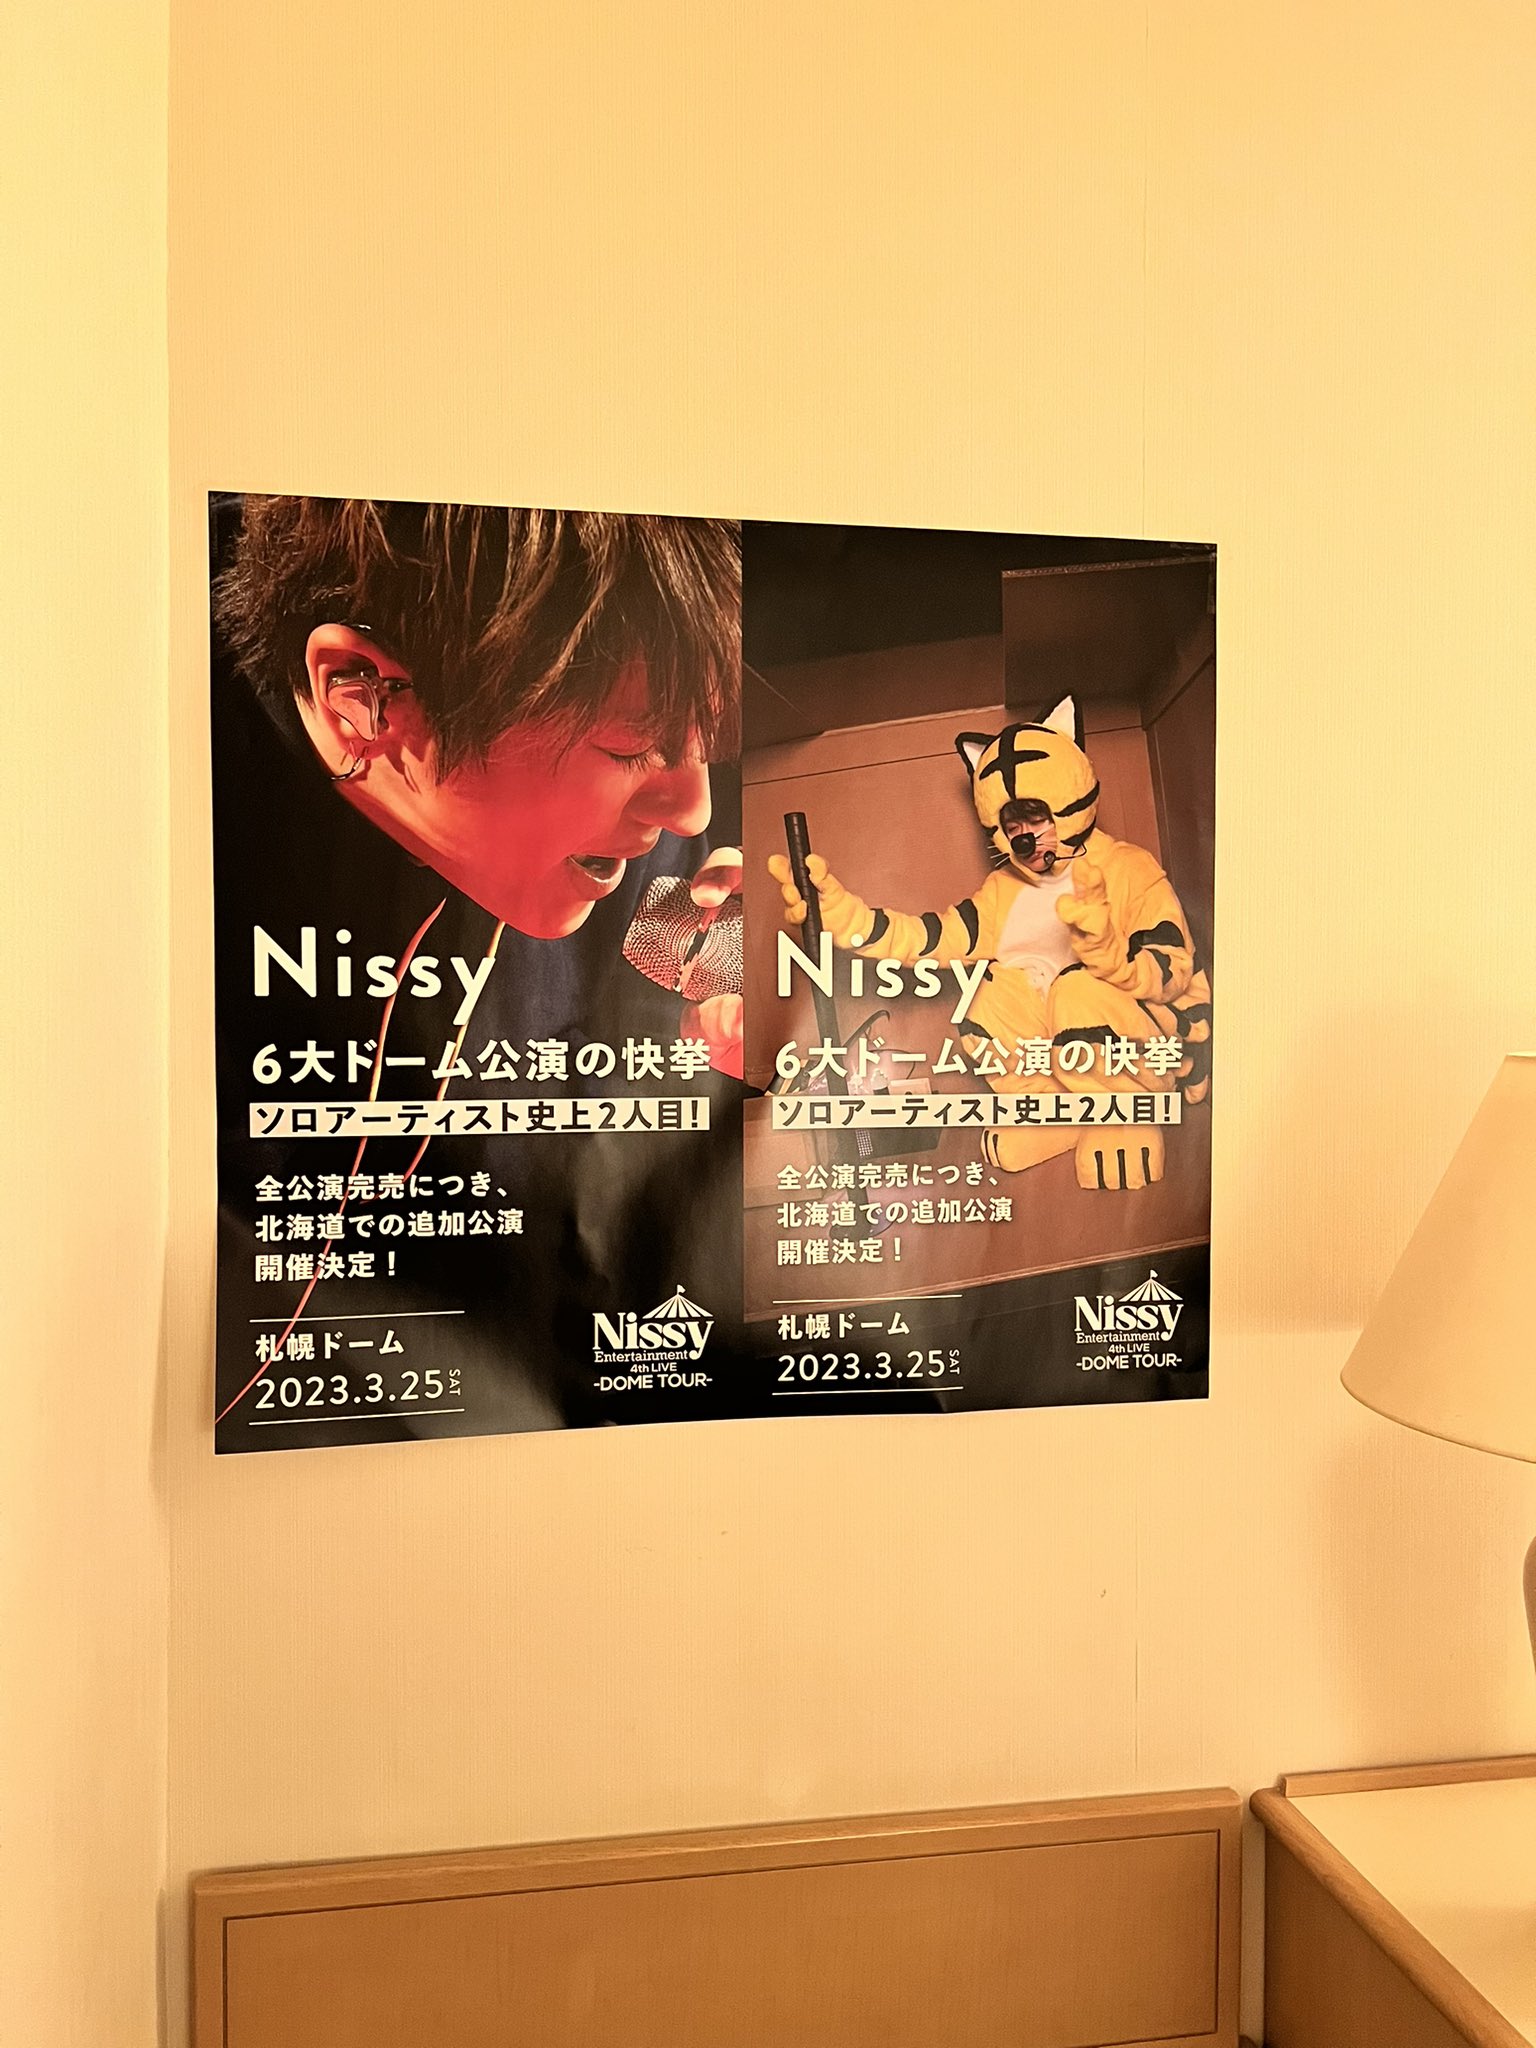 Nissy コンセプトルームグッズ | forext.org.br